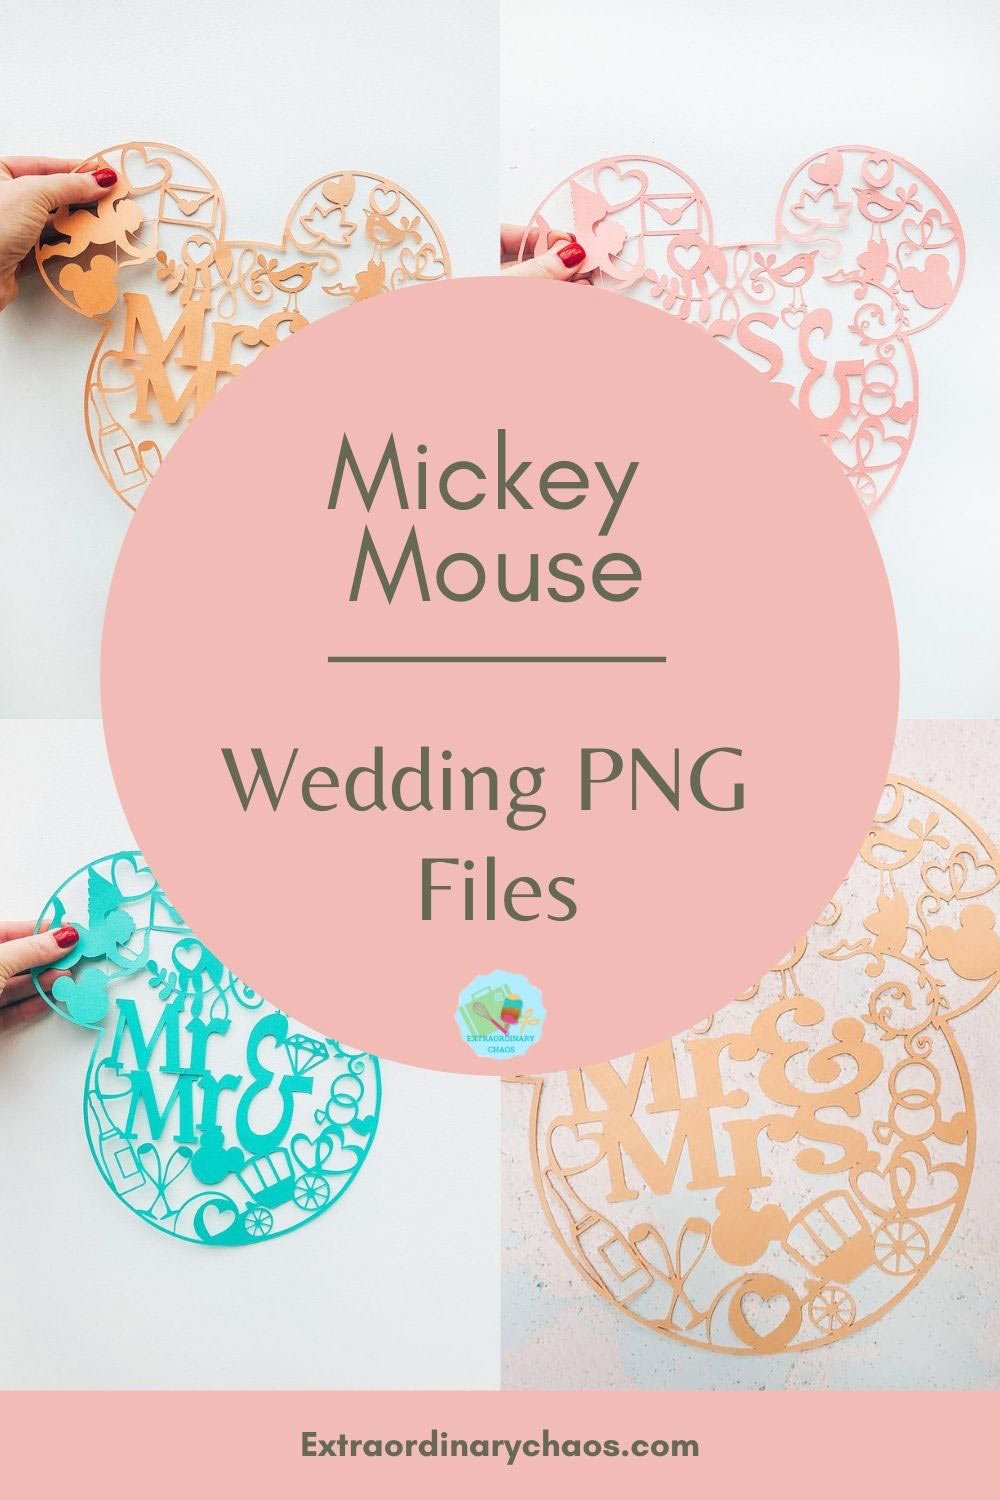 Mickey Mouse Wedding PNG Files for creating wedding decorations, table bunting and cards